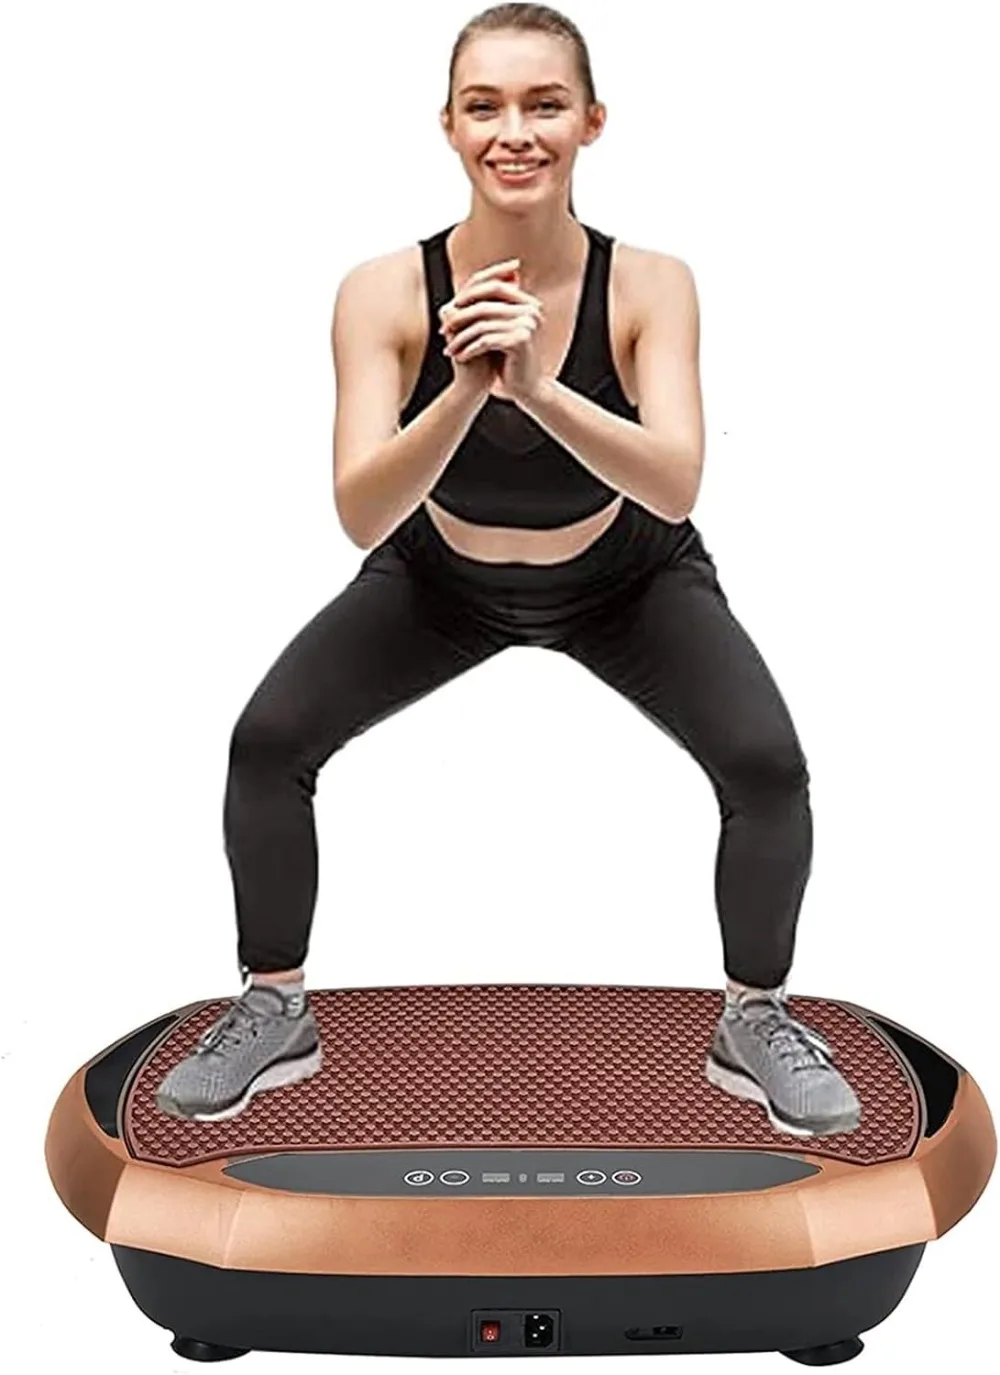 

Bolt Vibration Plate Exercise Machine - Lymphatic Drainage Machine for Weight Loss Home Fitness - Whole Body Vibration Platform